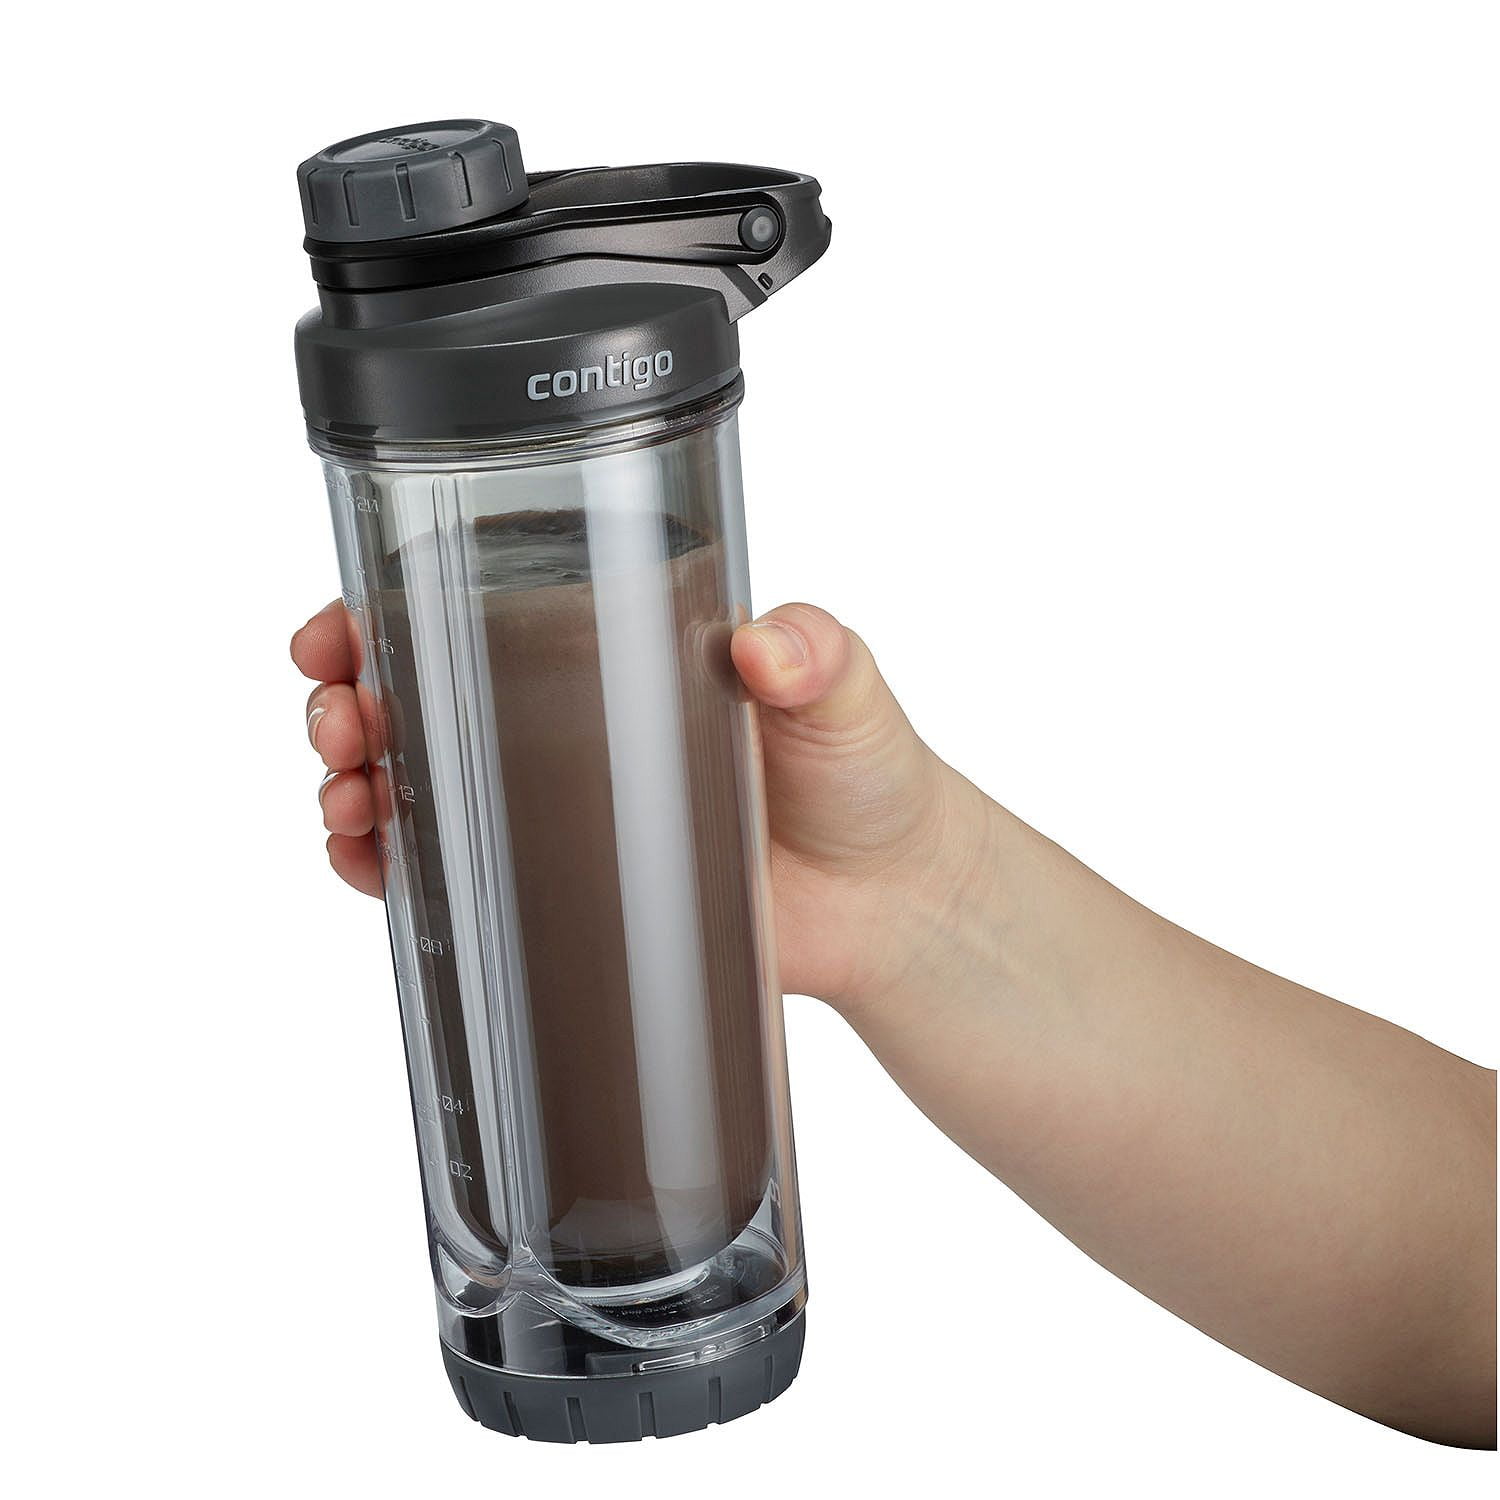 Our new Contigo FIT Shake & Go 2.0 Mixer Bottles have carabineer handles  that can easily hook to gym bags for portable protein shakes.